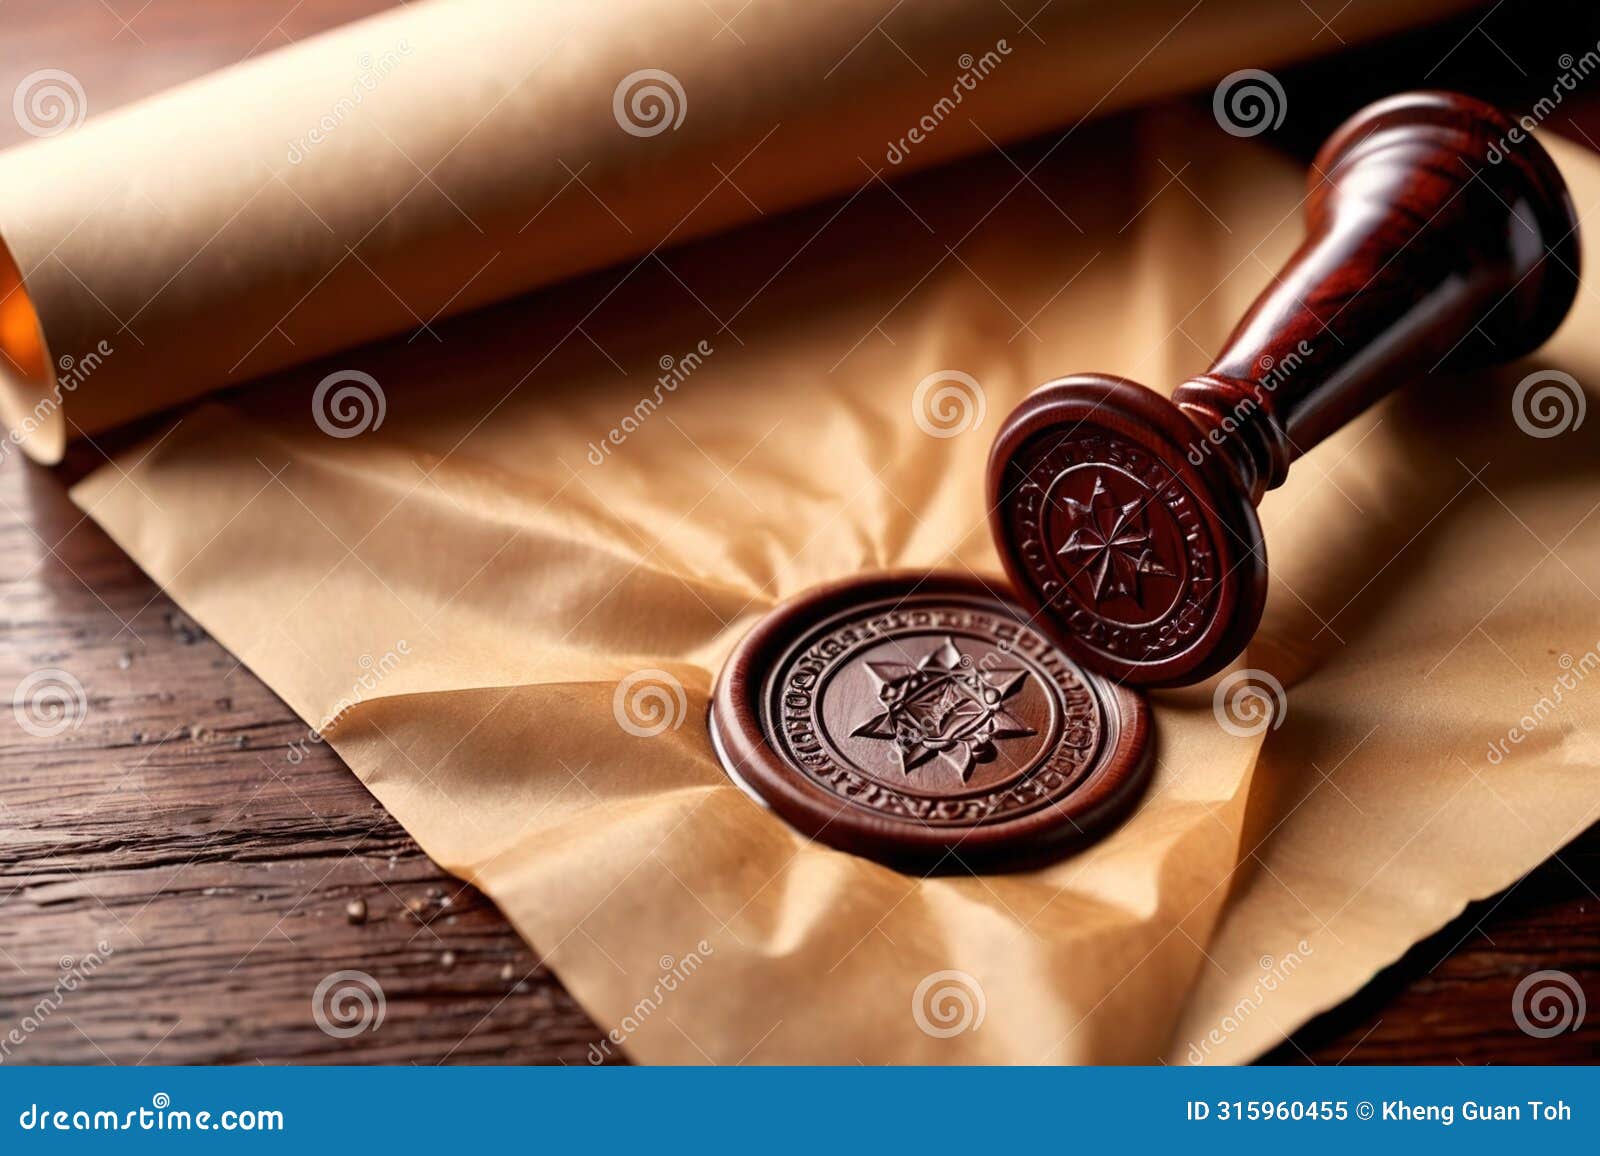 offical wax seal used to certify identity and authority, on document envelope